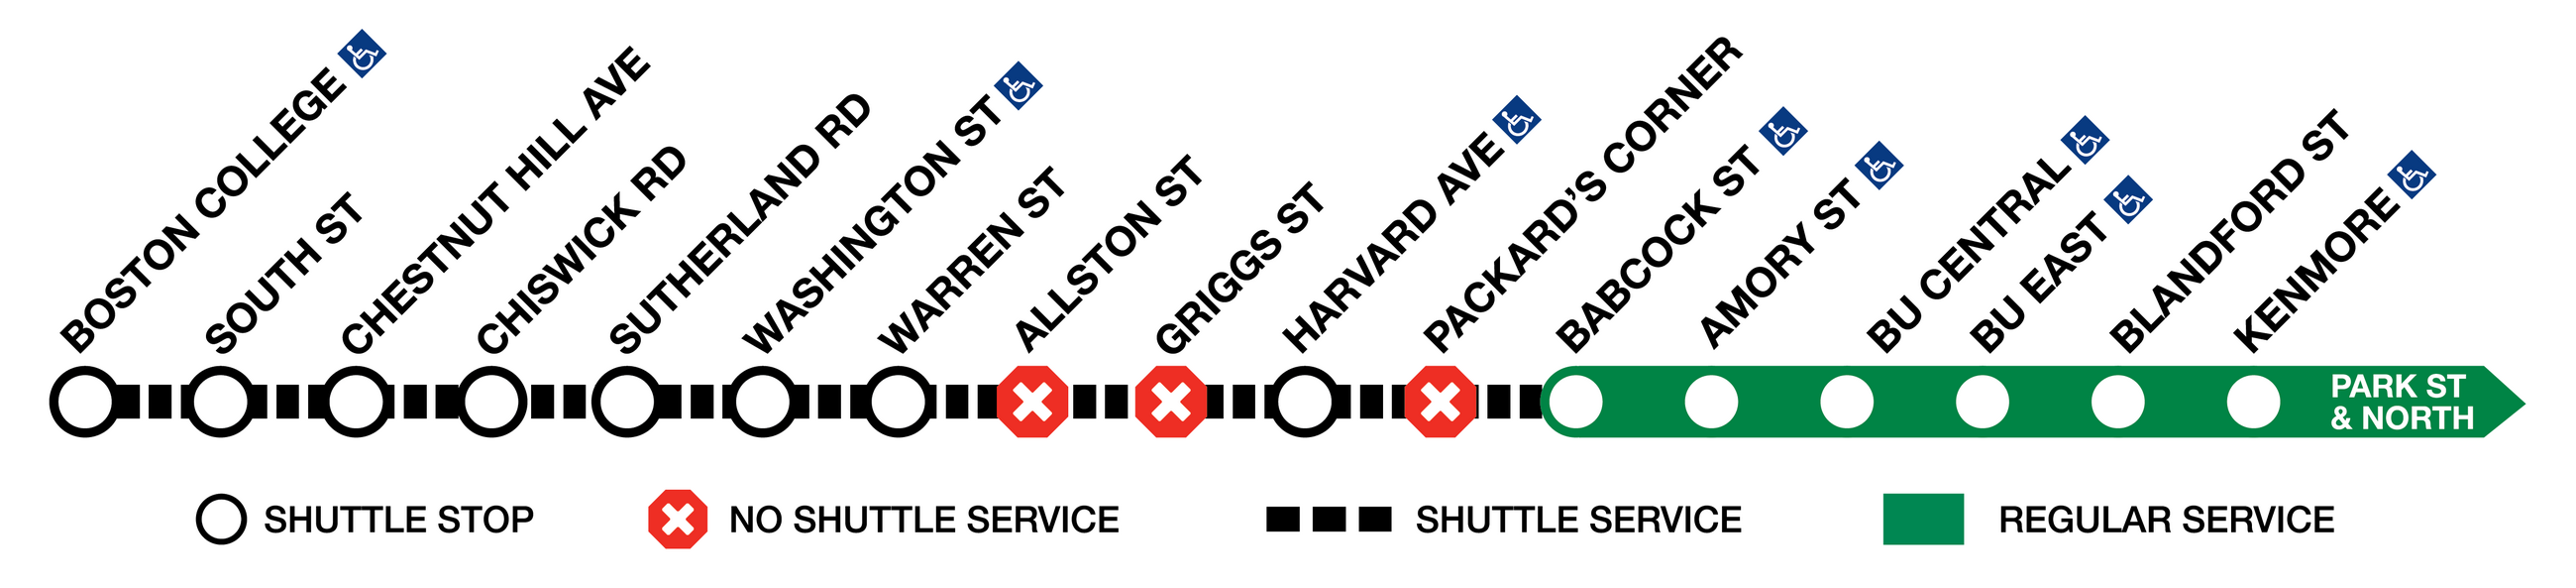 Graphic of shuttle service and skipped stops for the Green Line closure